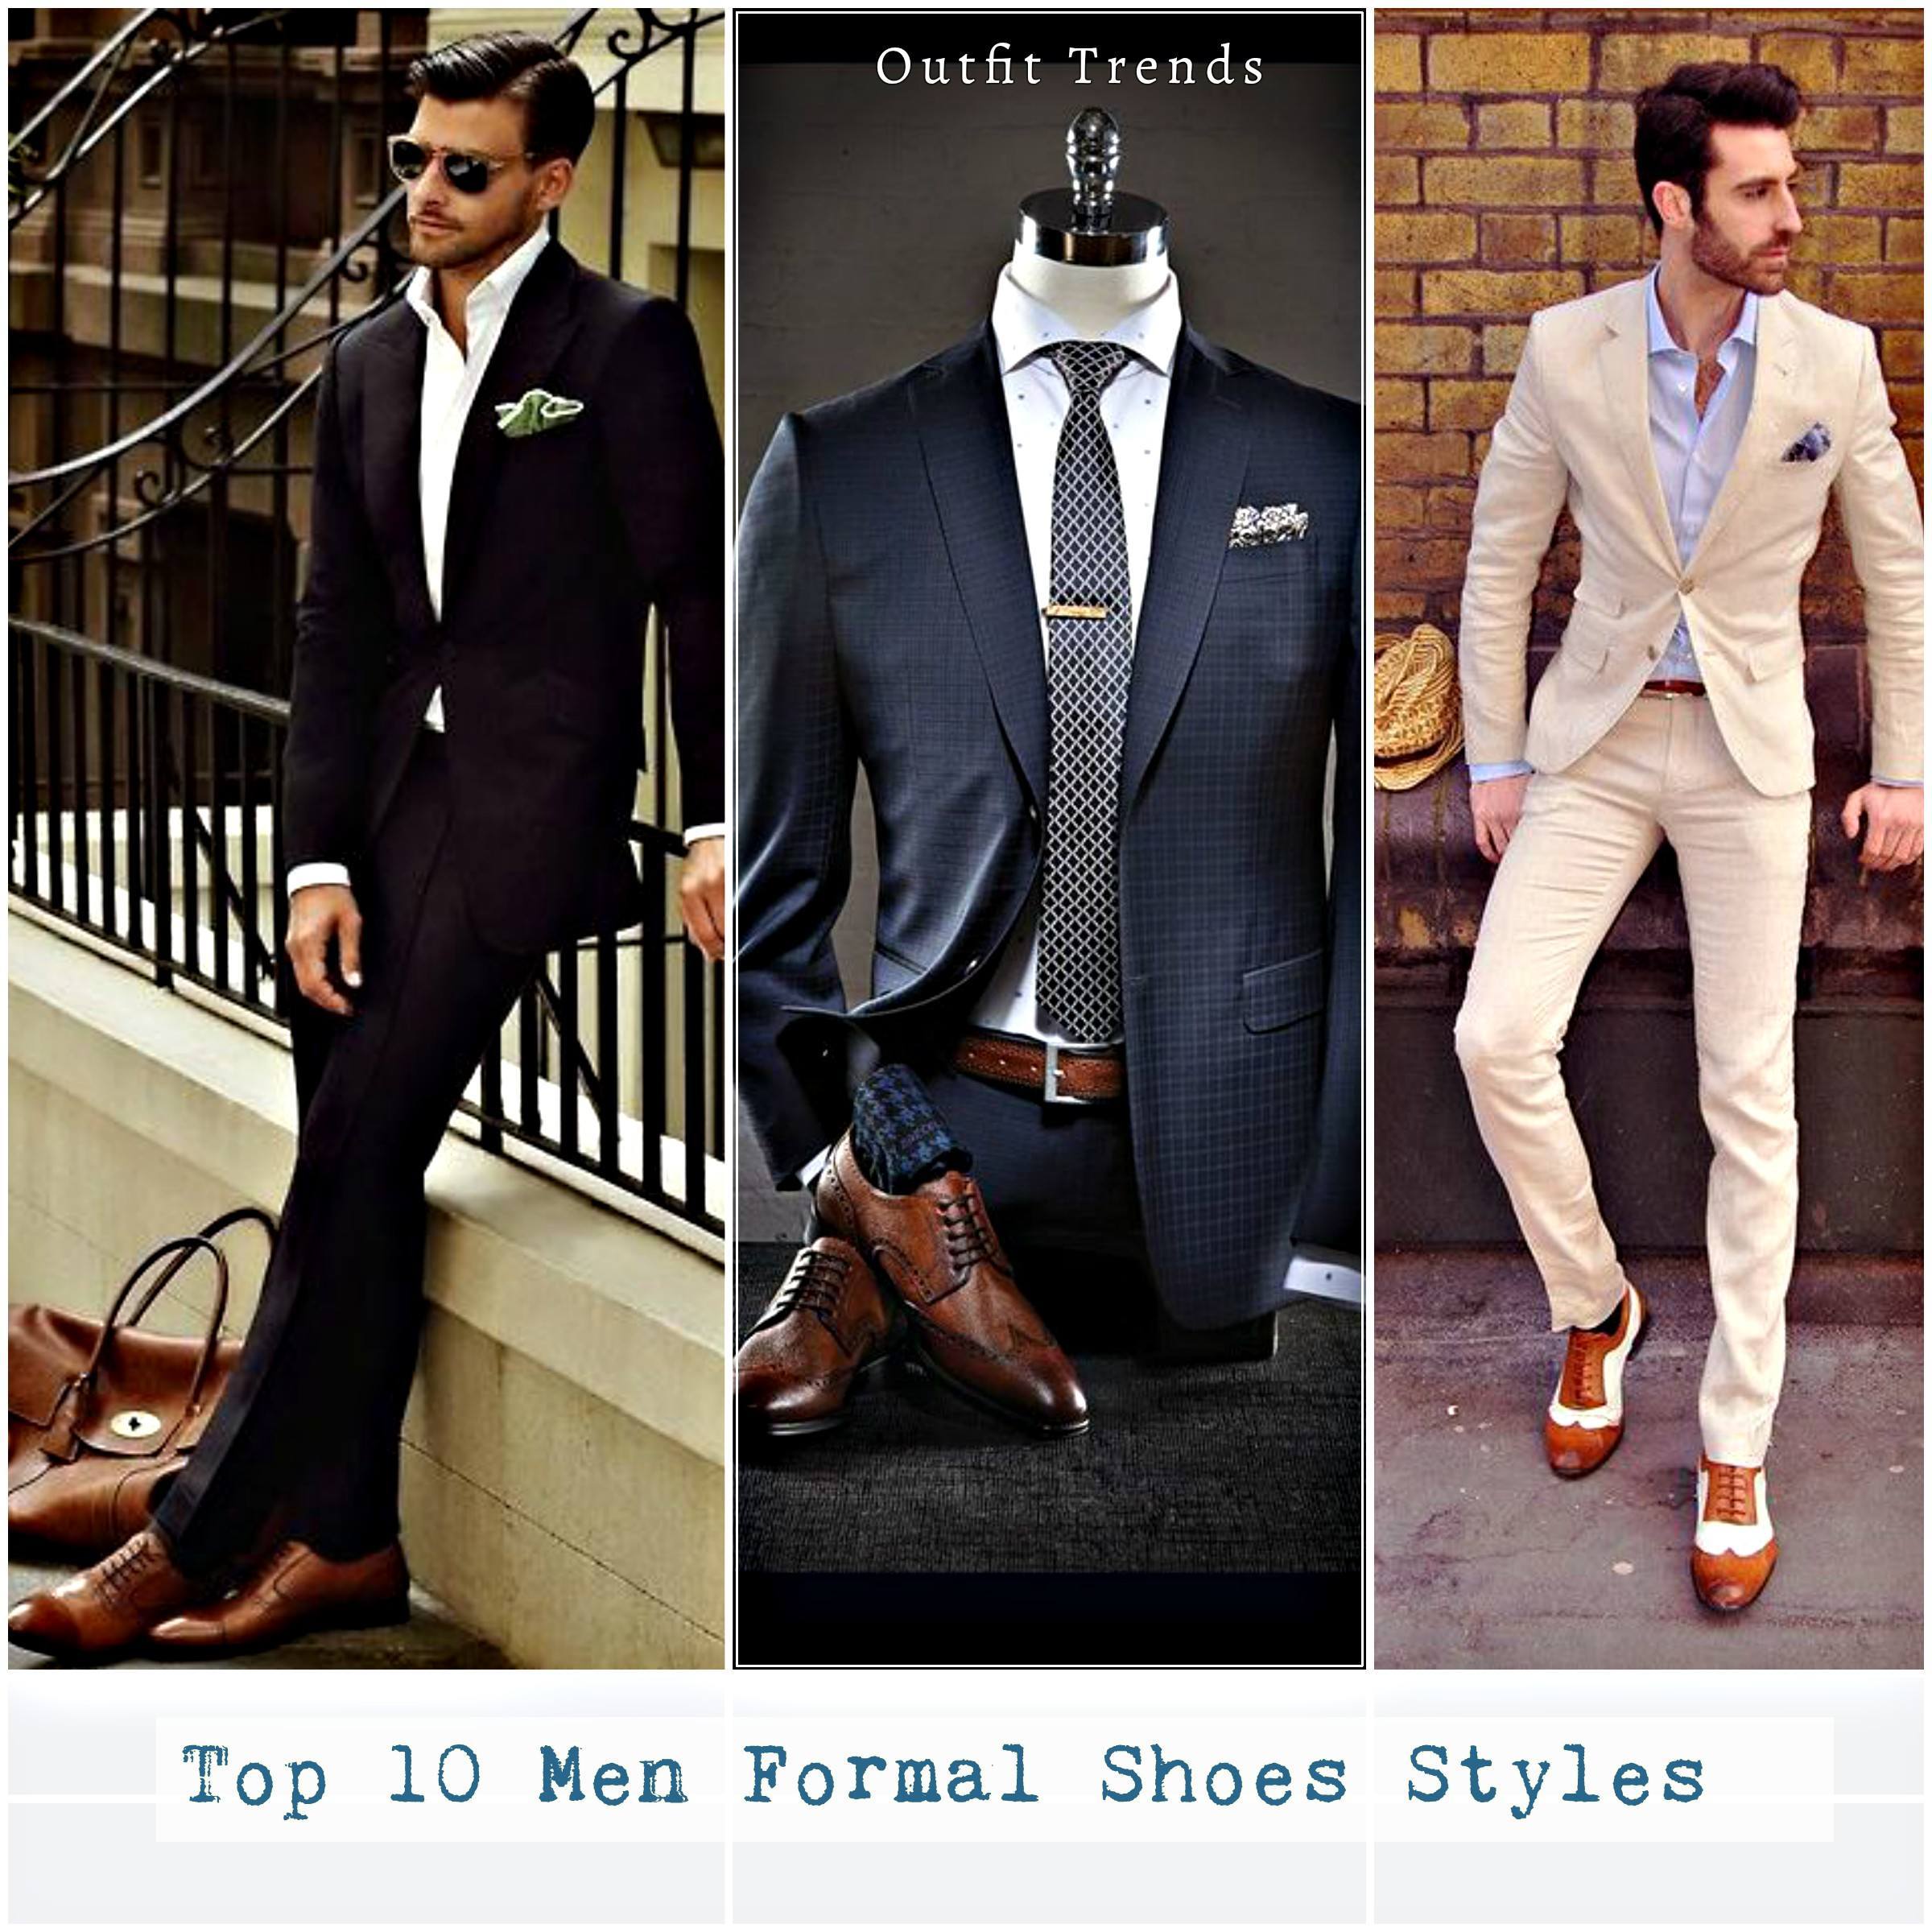 Top 10 Men Formal Shoes Styles And Ideas How to Wear them.